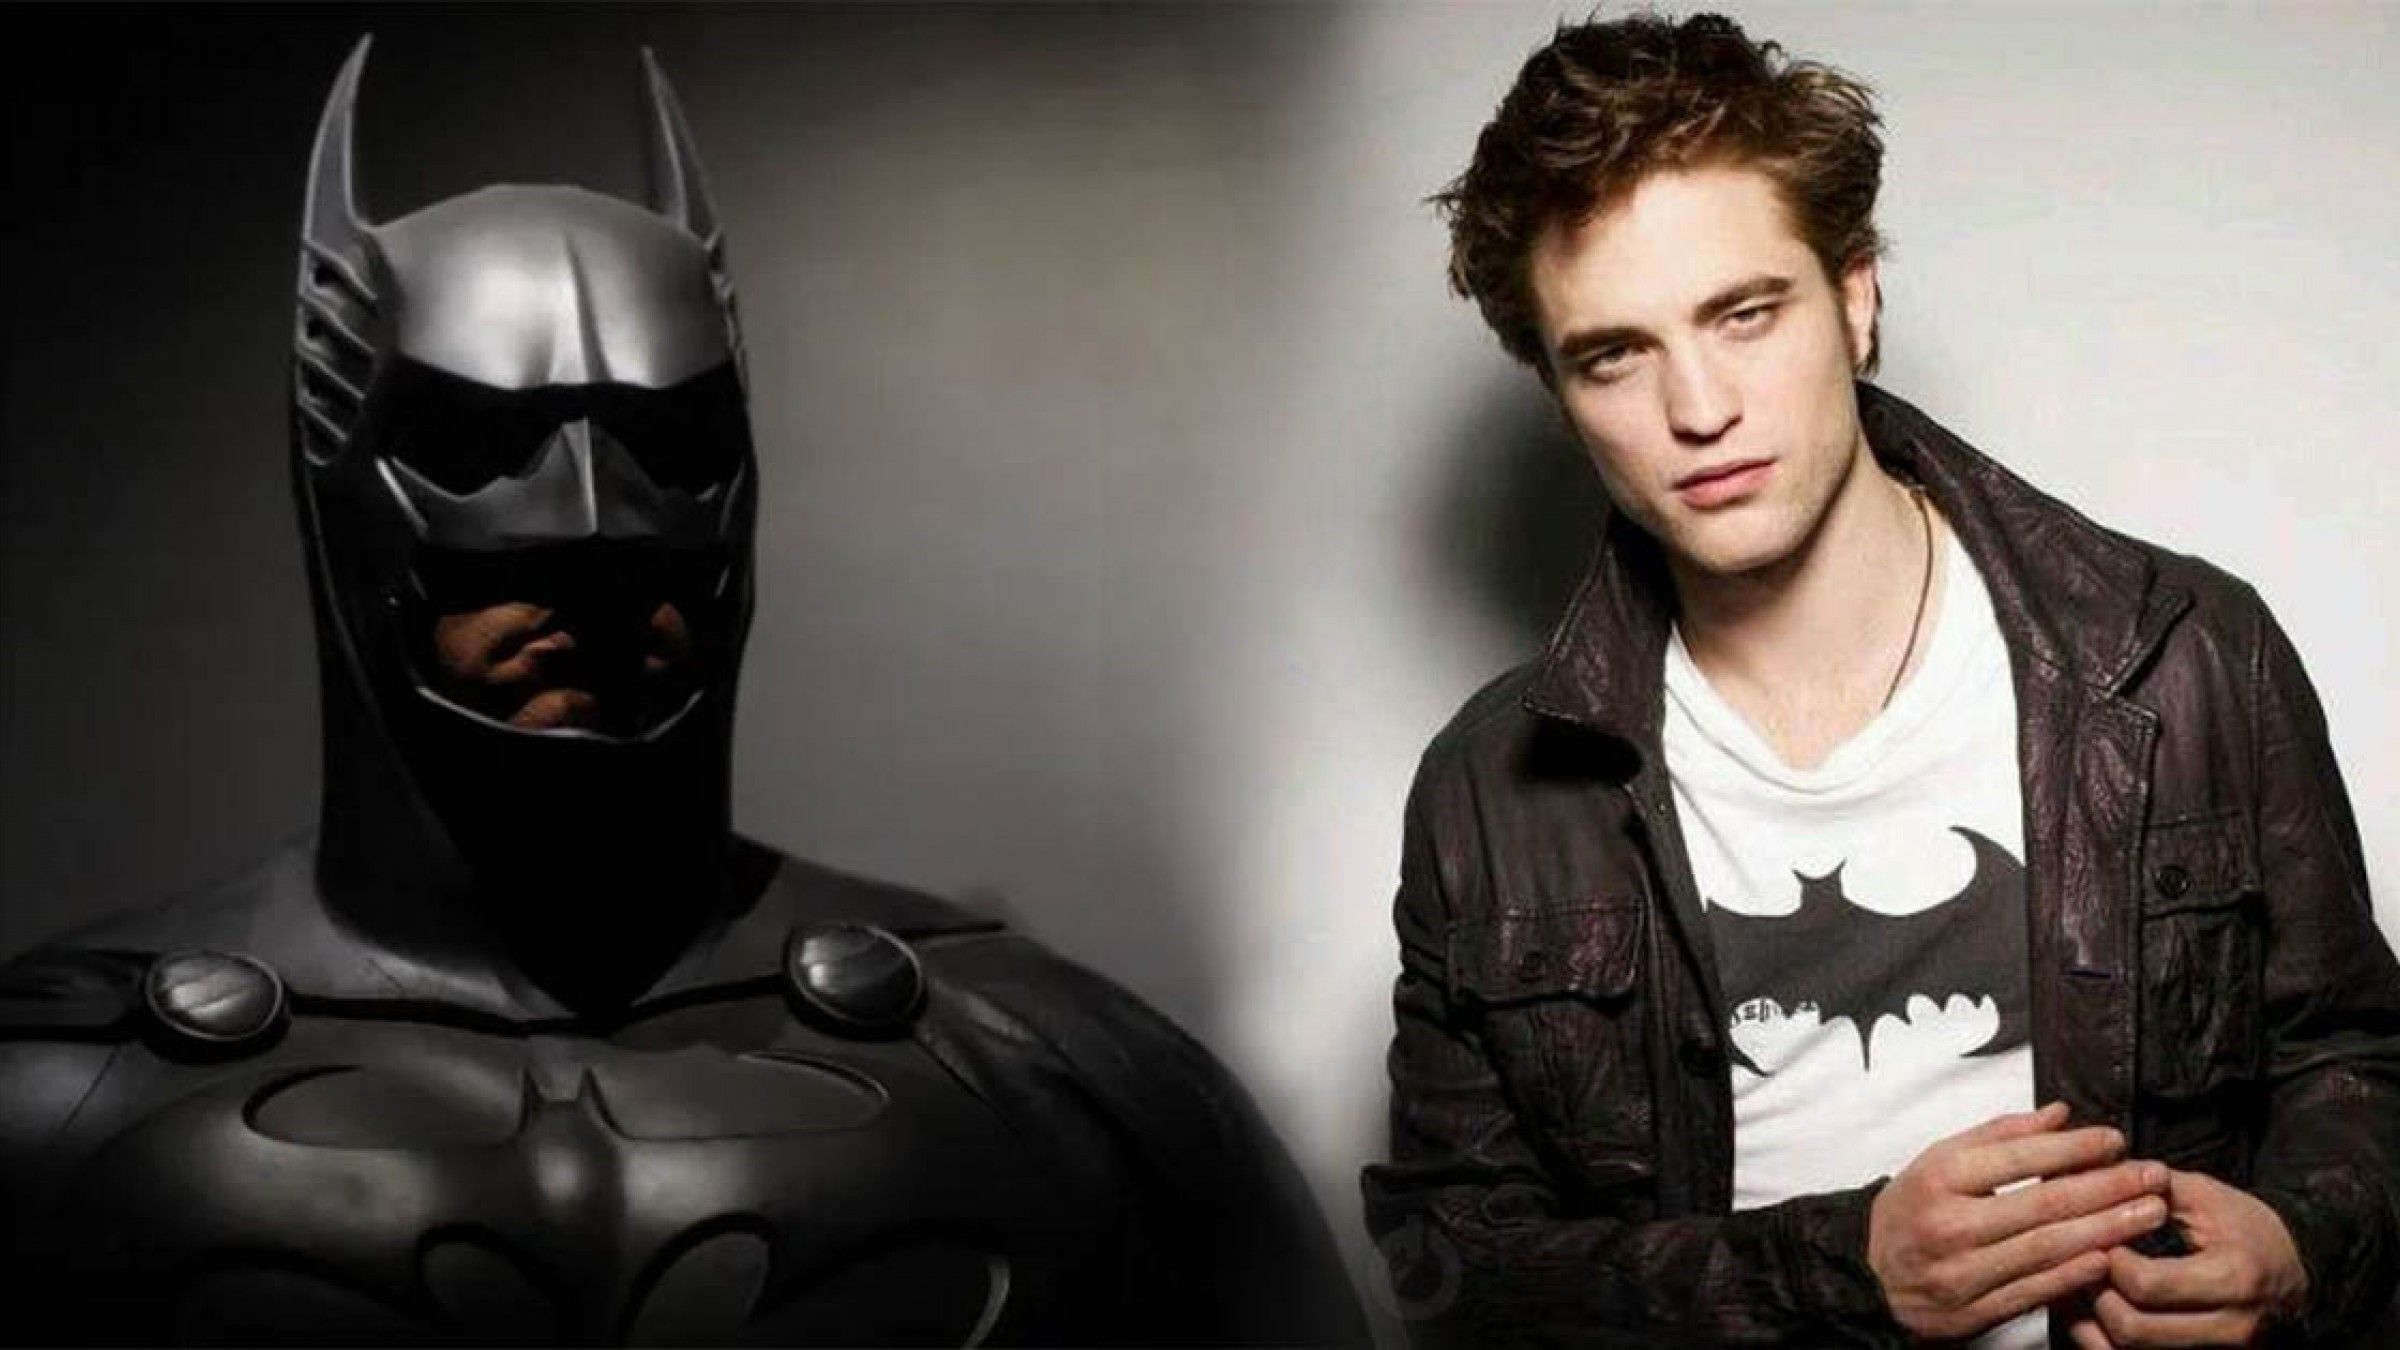 Will Robert Pattinson be able to fit the Batman suit?